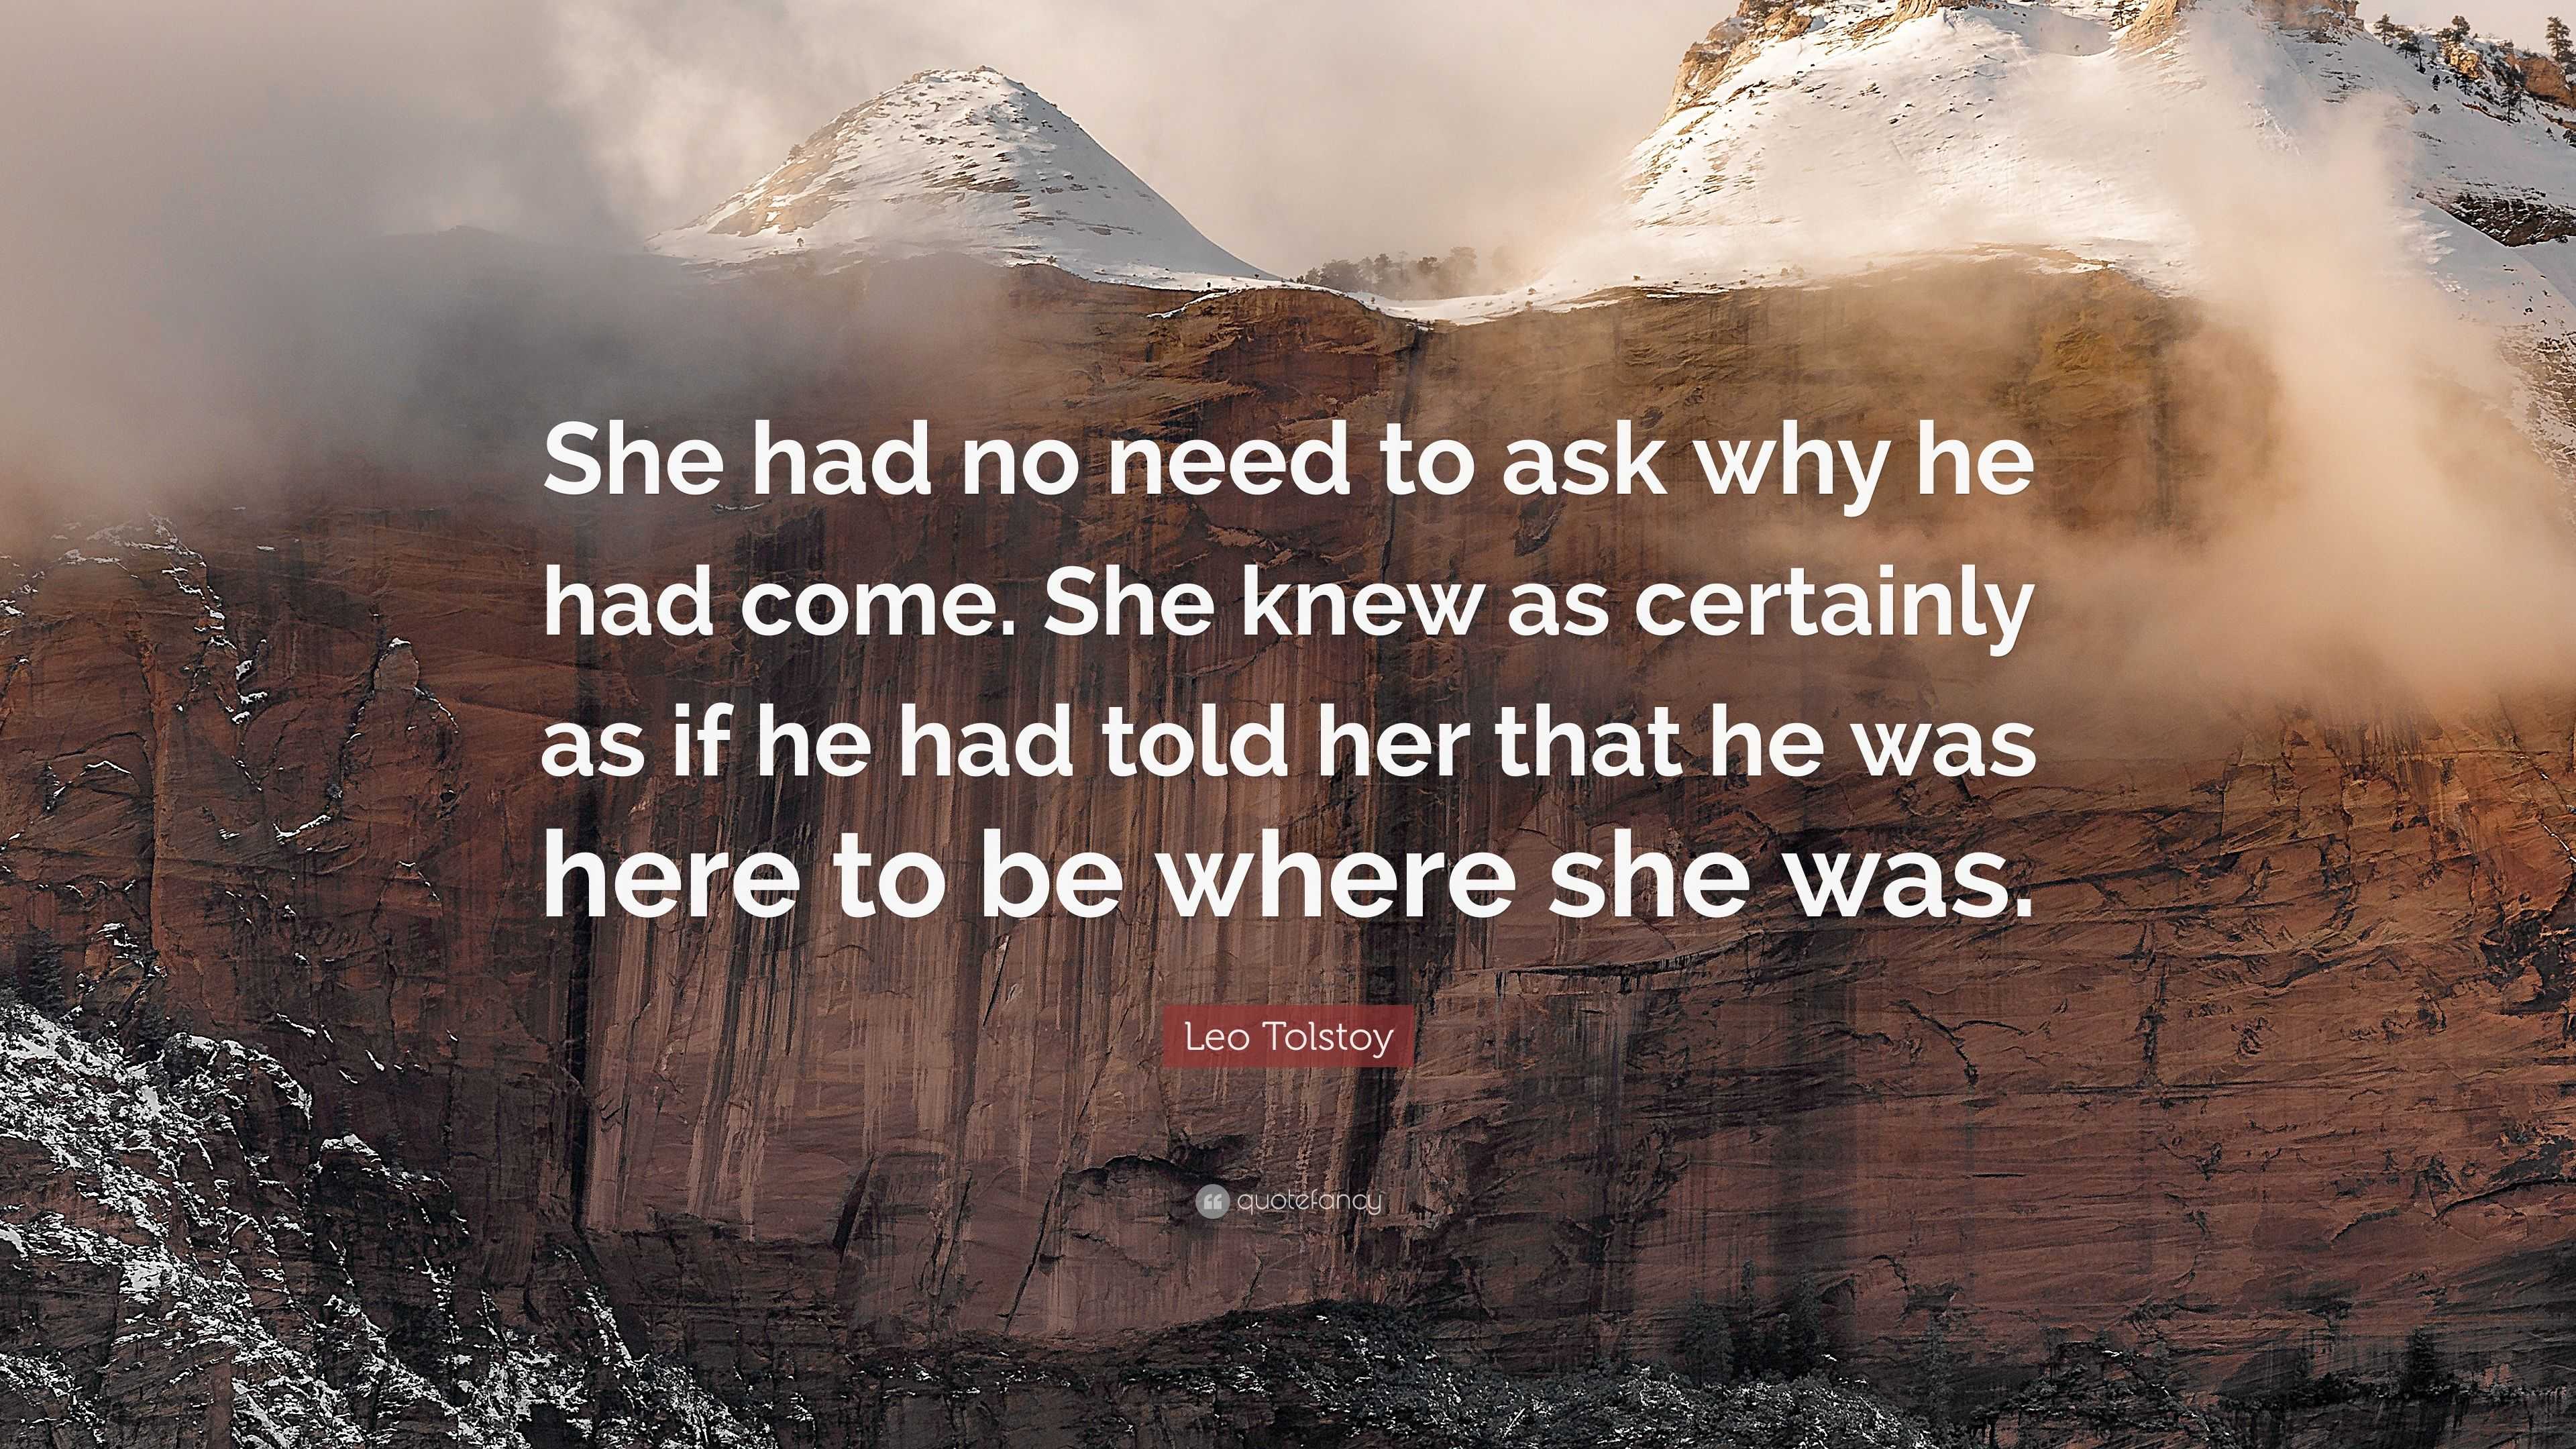 Leo Tolstoy Quote: “She had no need to ask why he had come. She knew as ...